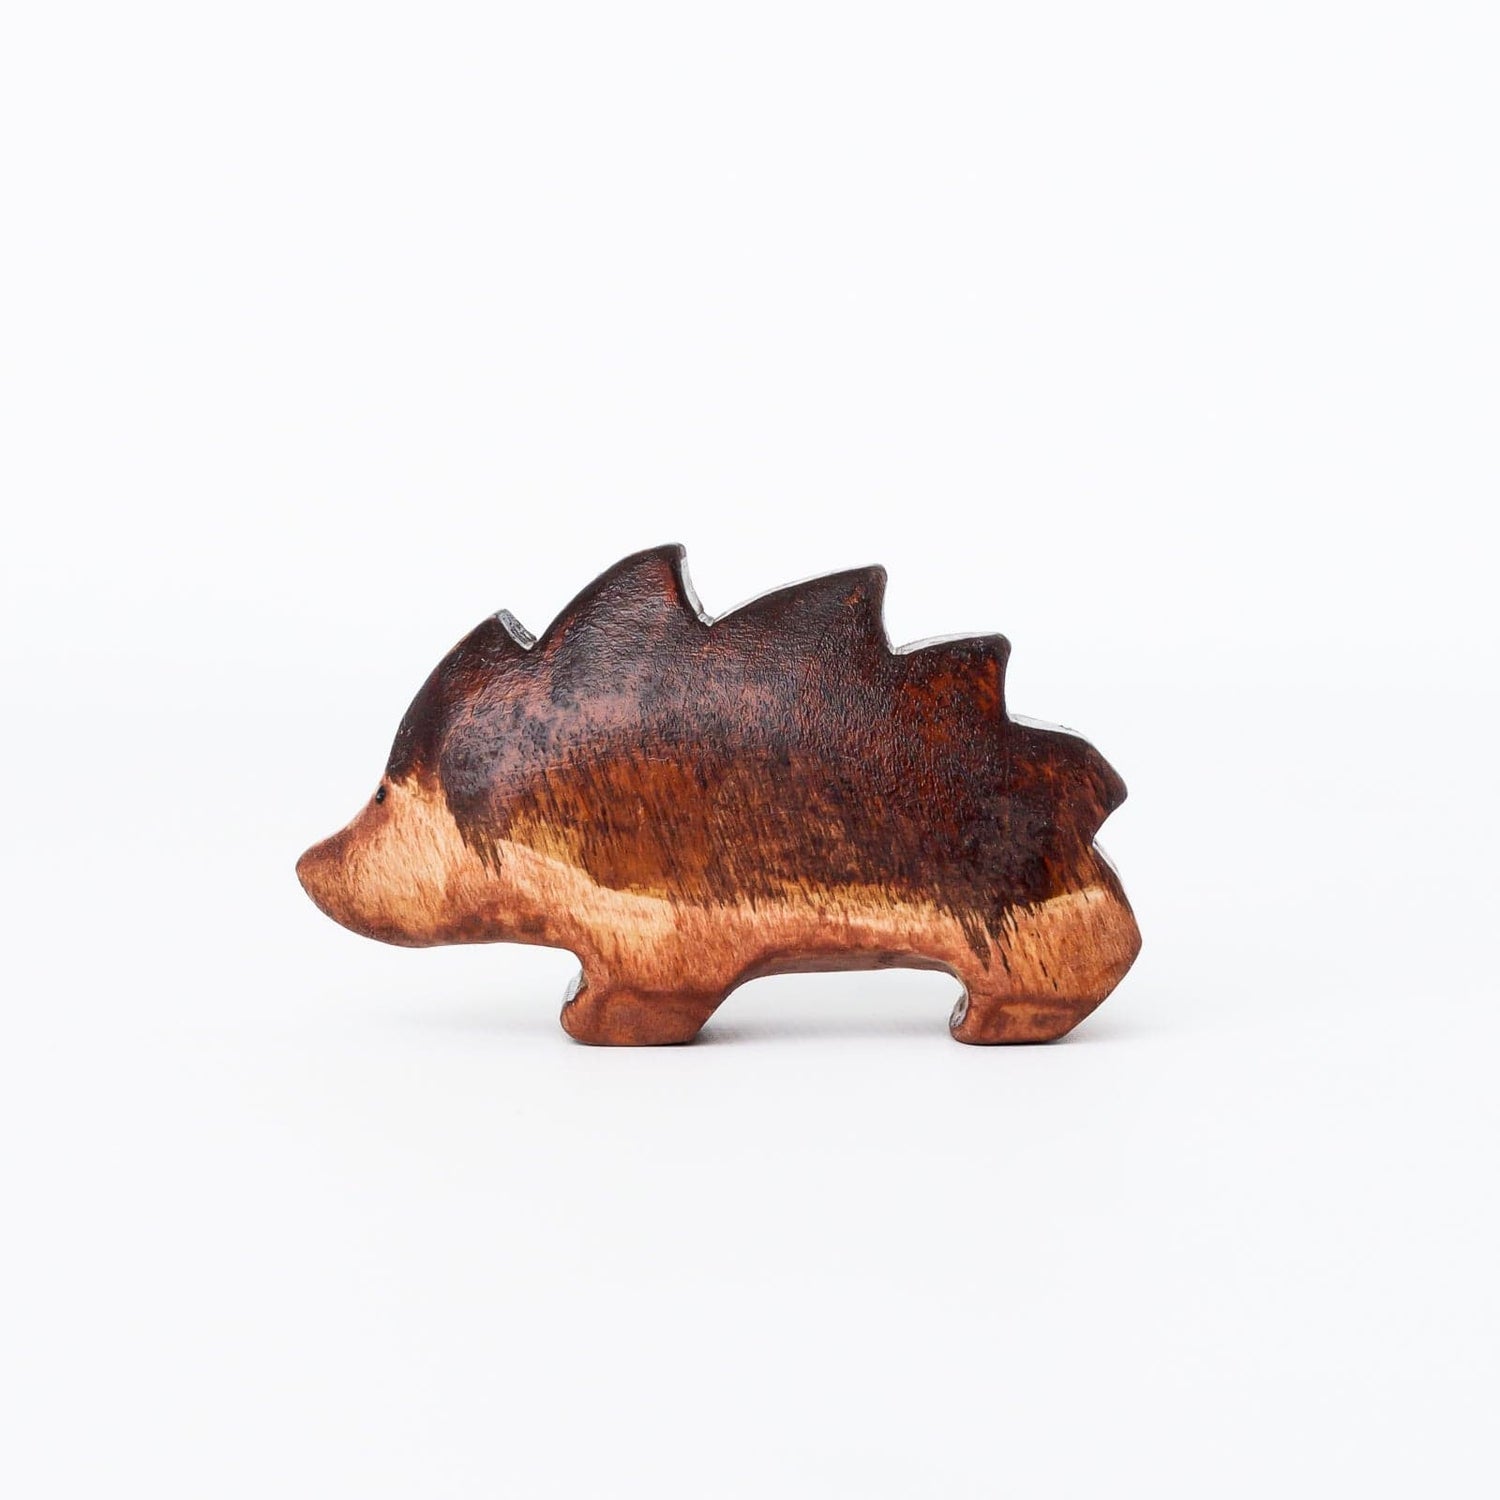 Bumbleberry Toys Wooden Animals "Hetty Hedgehog" Wooden Animal Toy (Handmade in Canada)